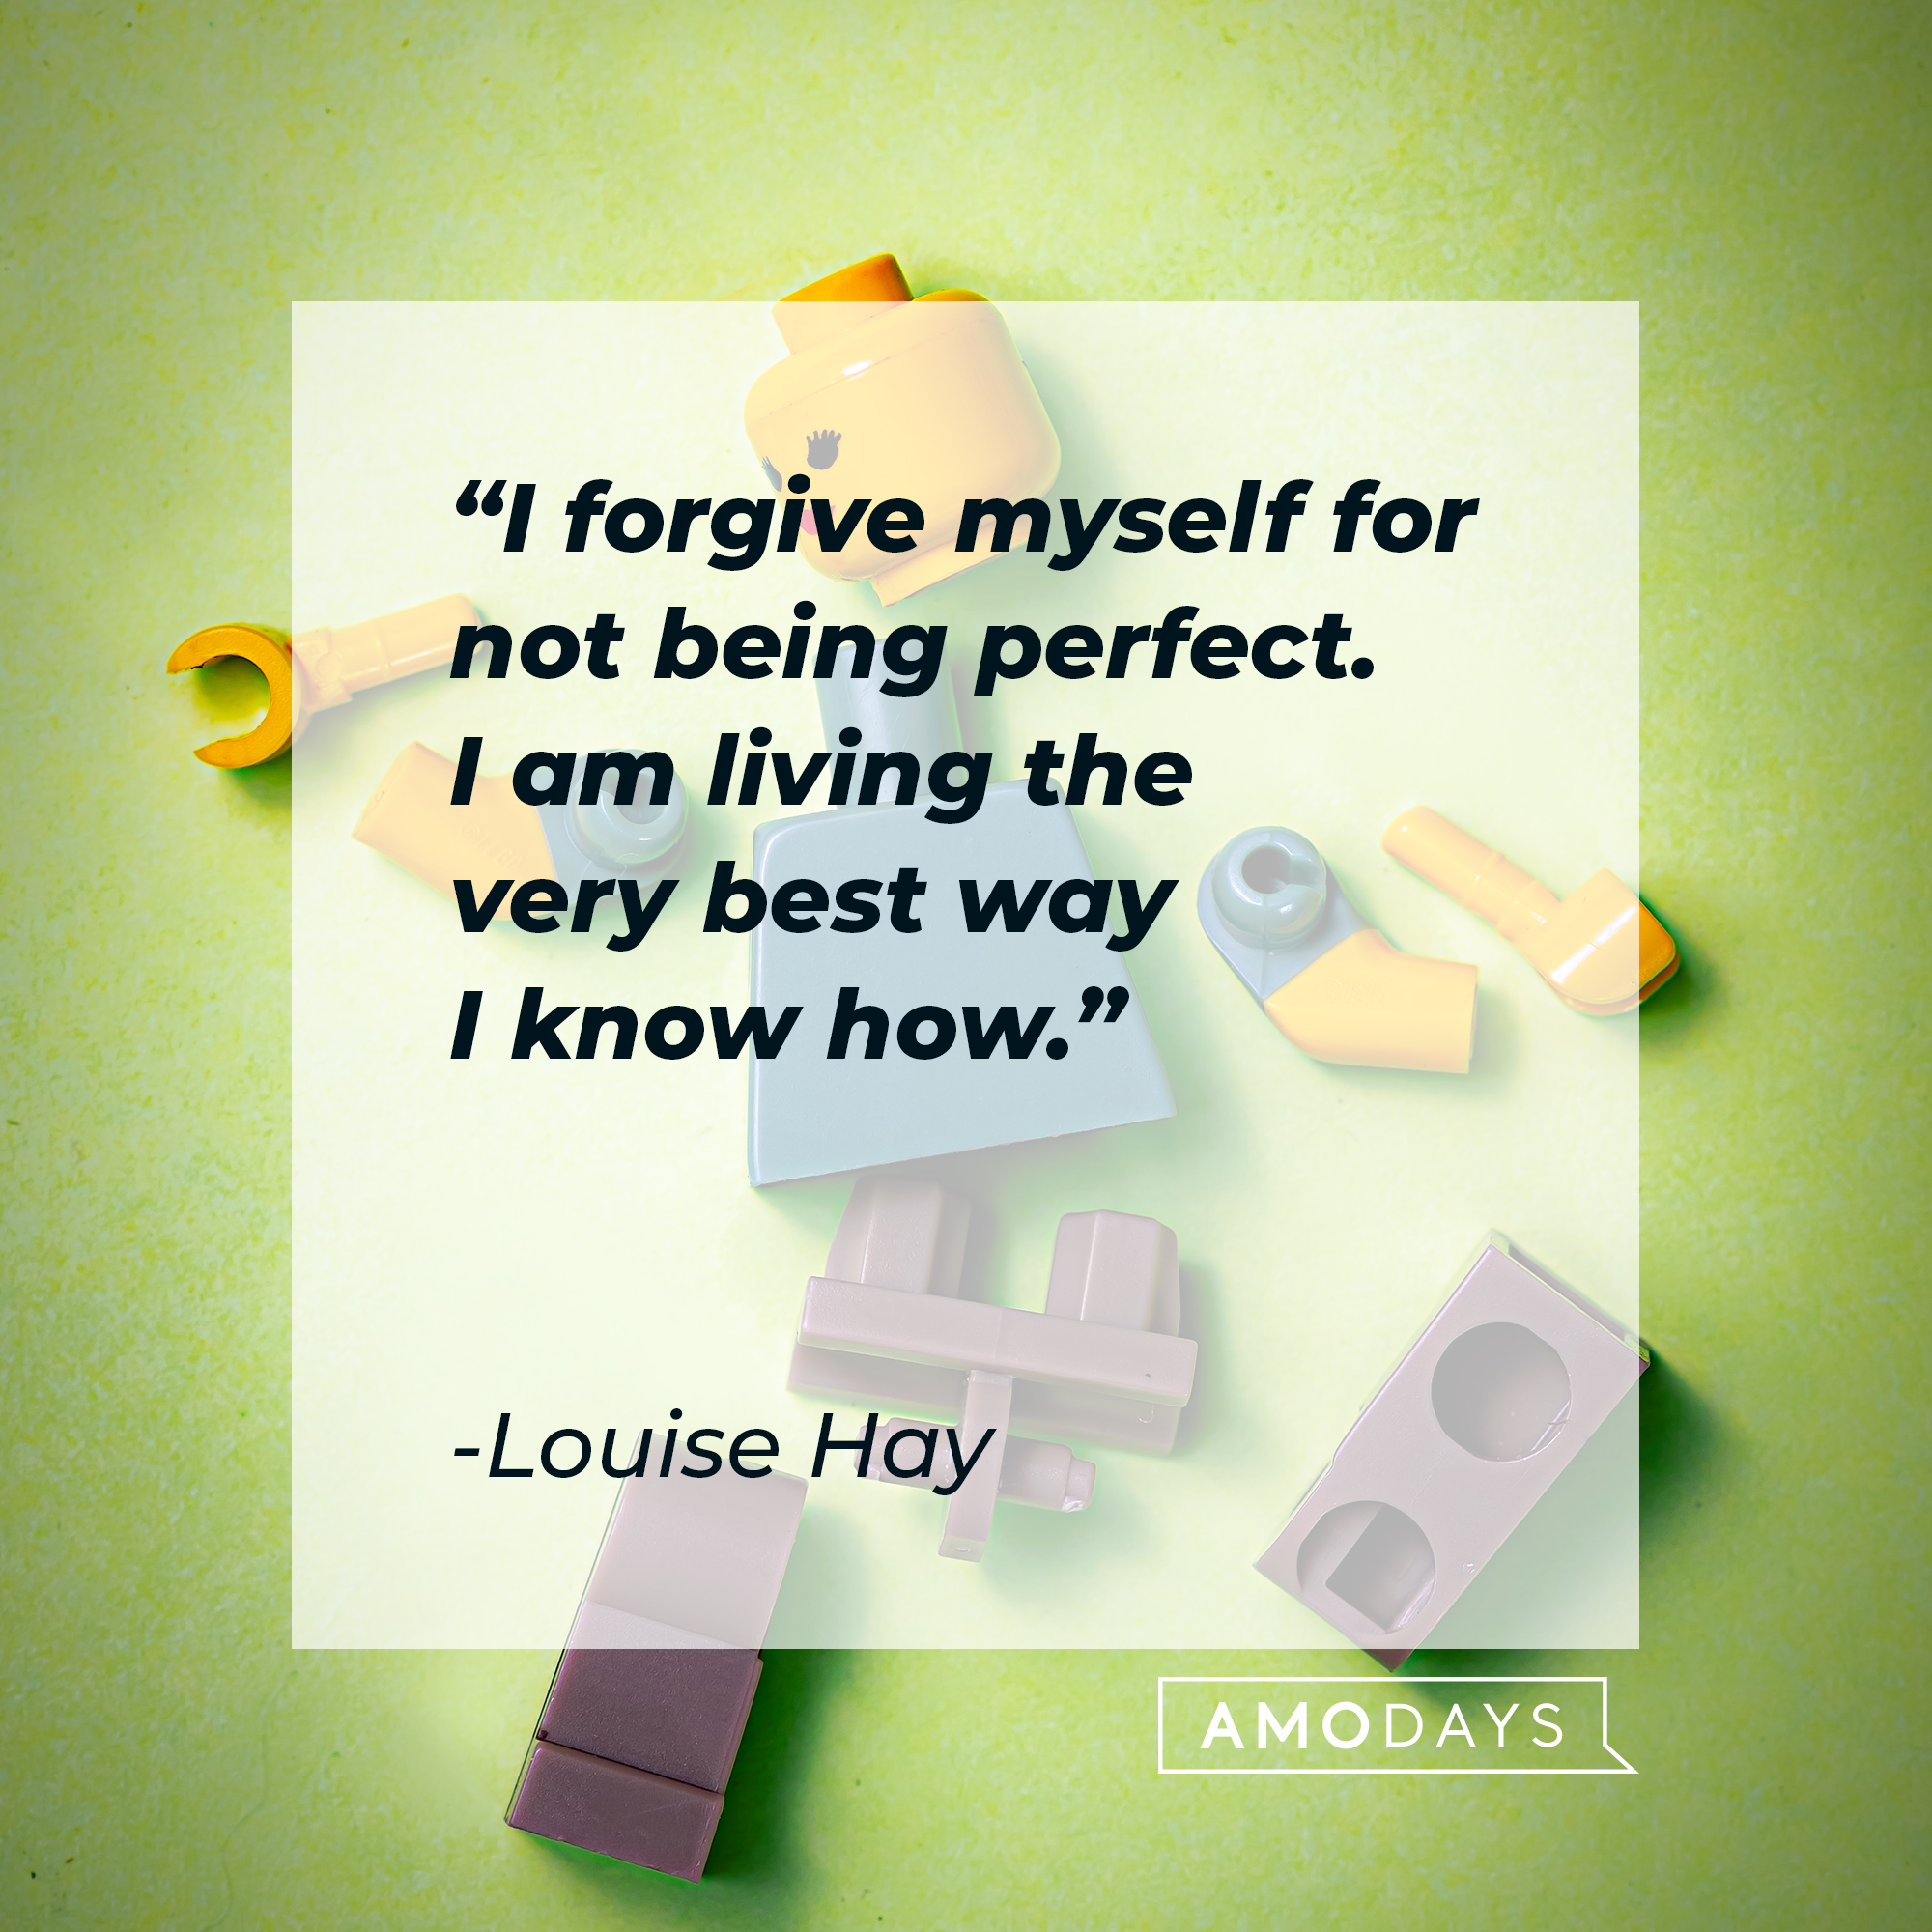 Louise Hay's quote: "I forgive myself for not being perfect. I am living the very best way I know how." | Image: Unsplash